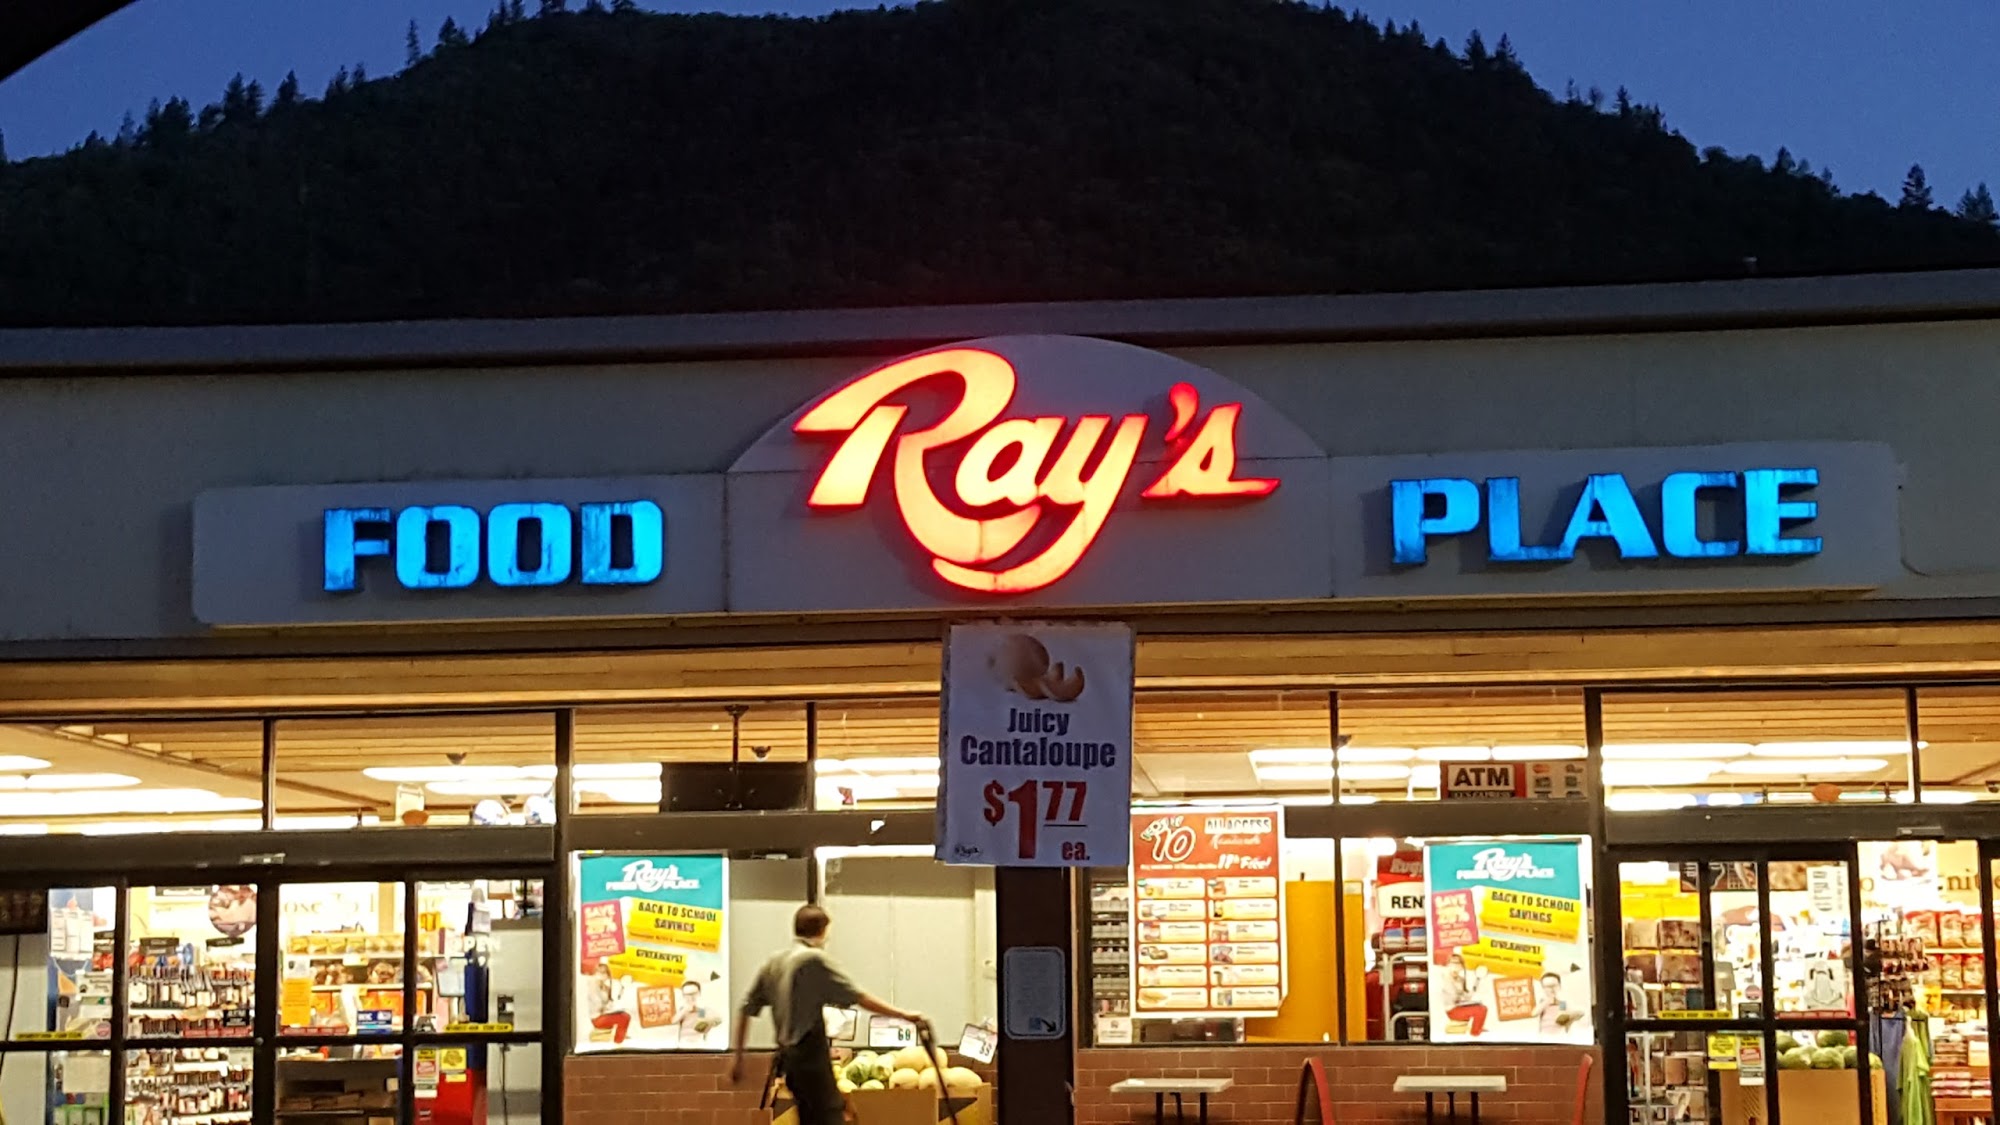 Rays Food Place